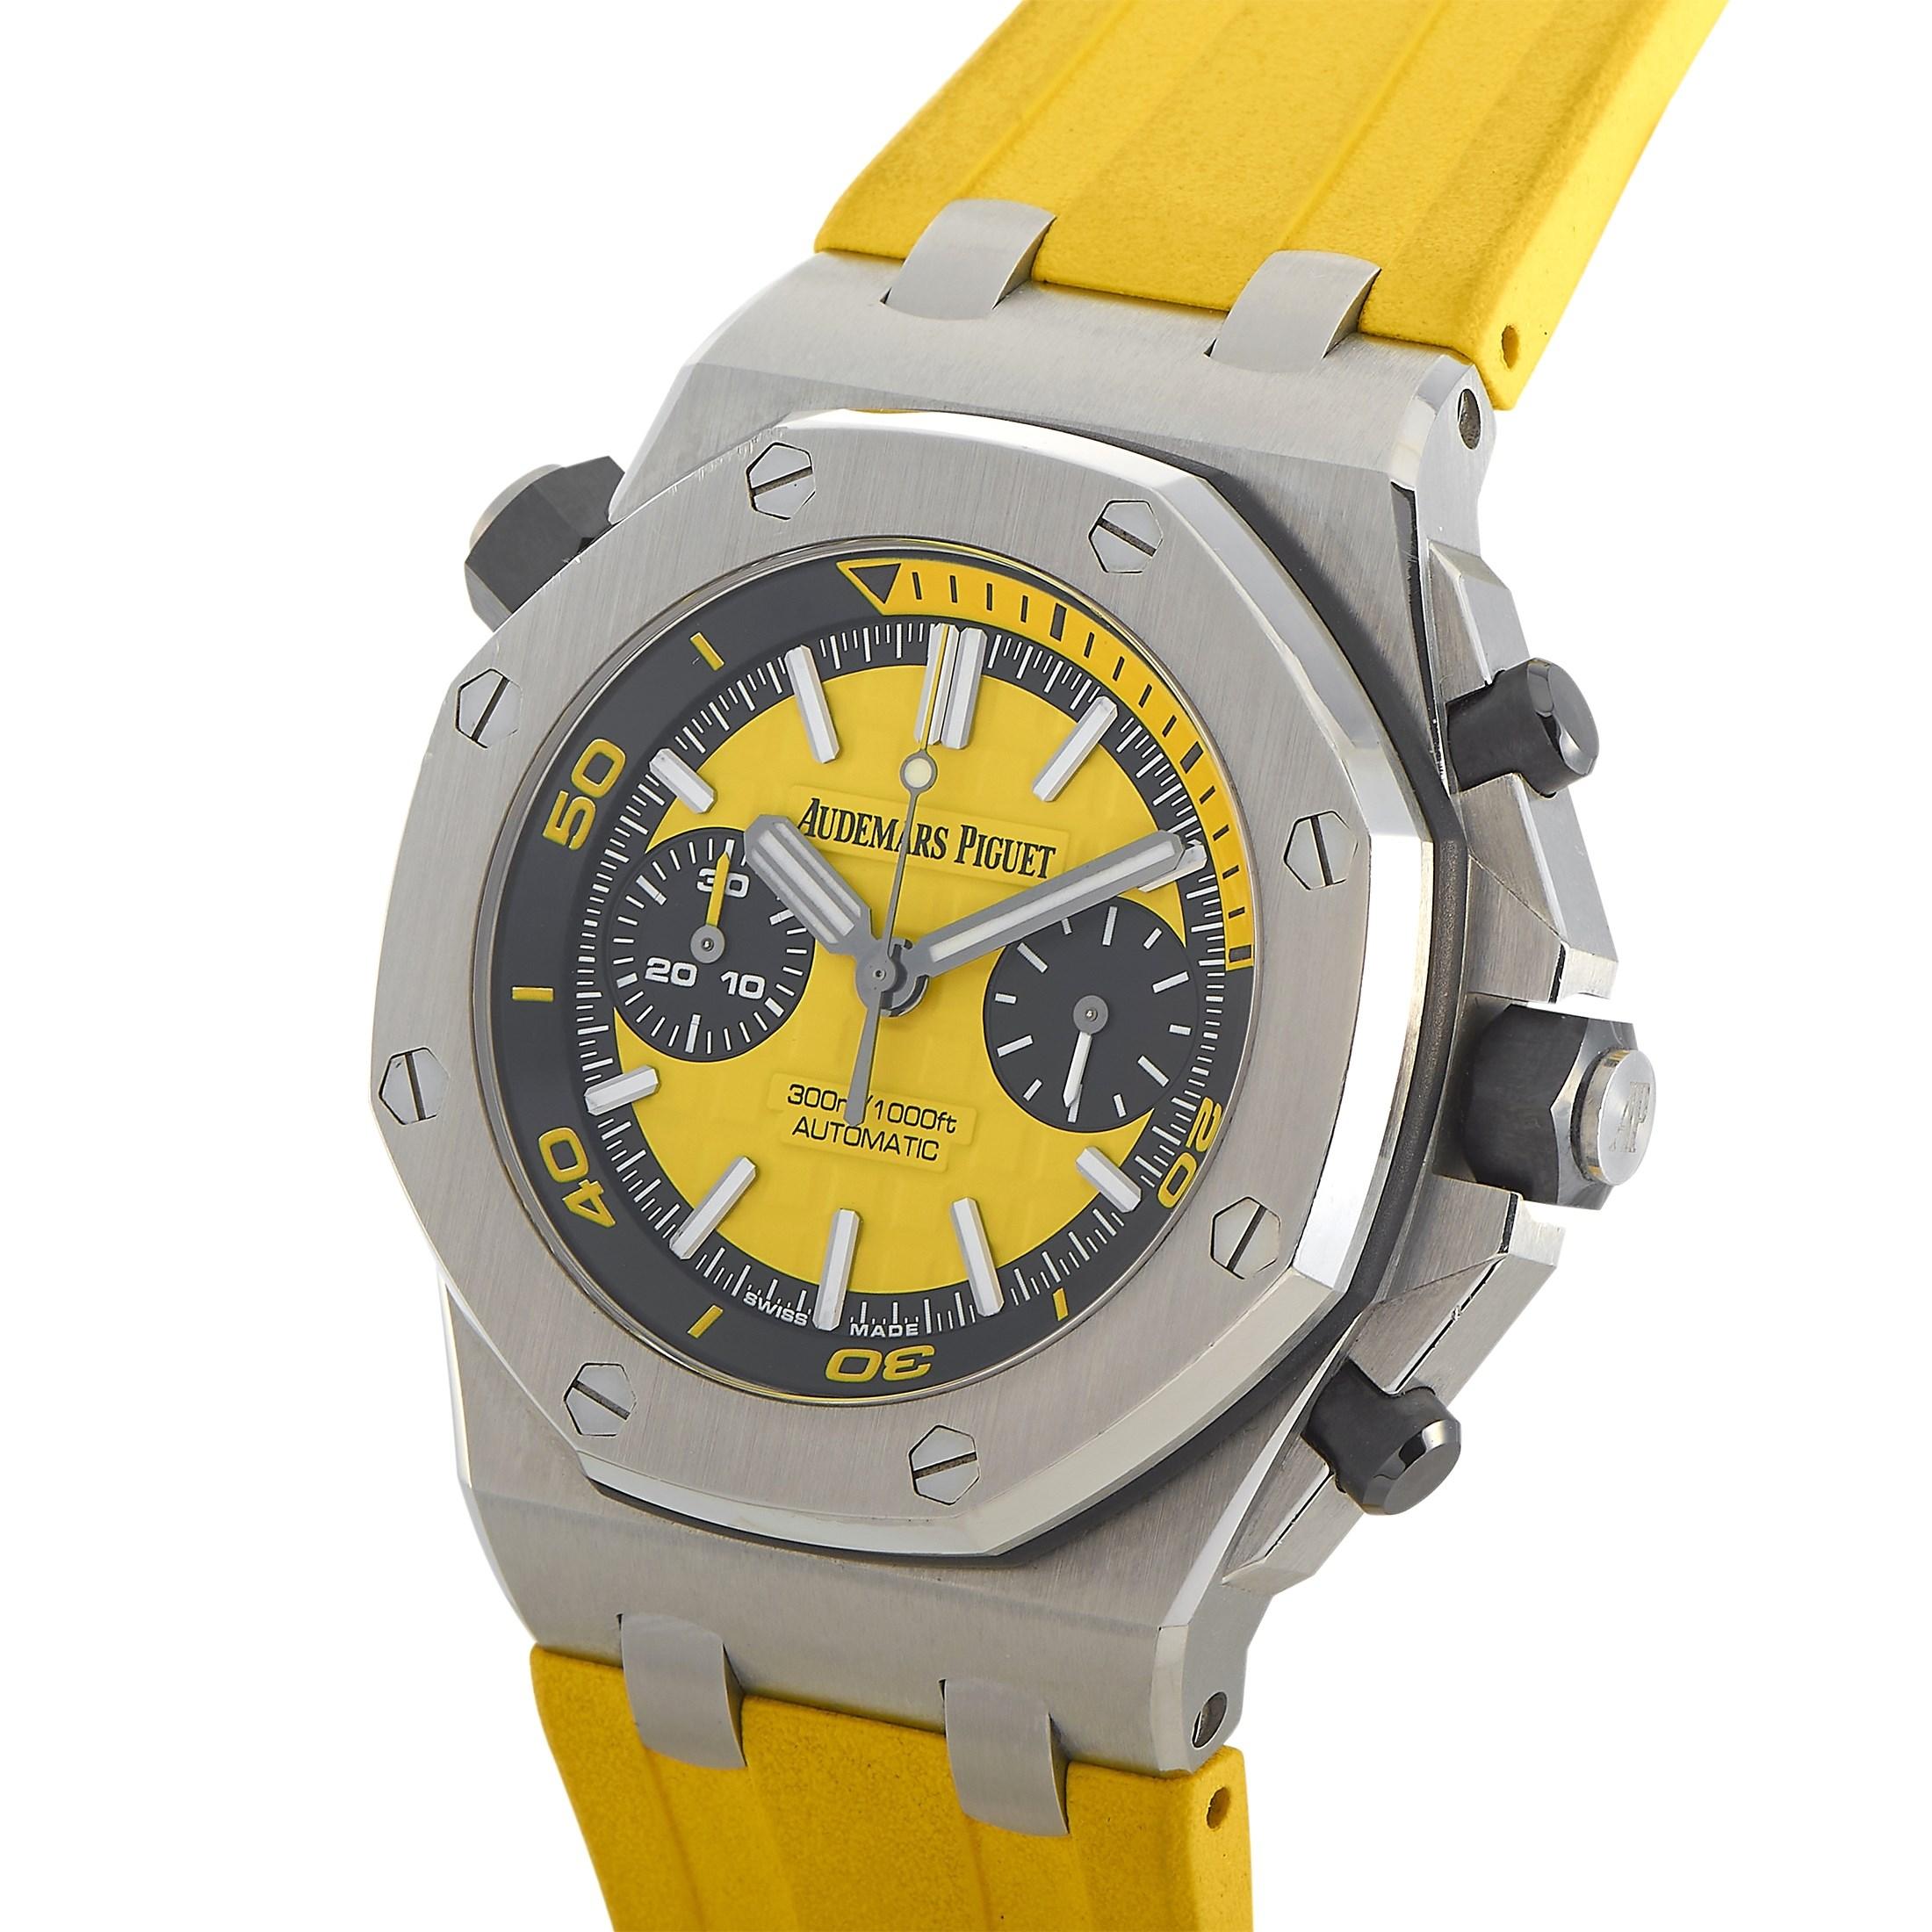 What better combination to keep you company on adventurous underwater exploration than the captivating black and bright yellow for excellent contrast, as featured in this exceptional divers? timepiece from Audemars Piguet that ensures reliable